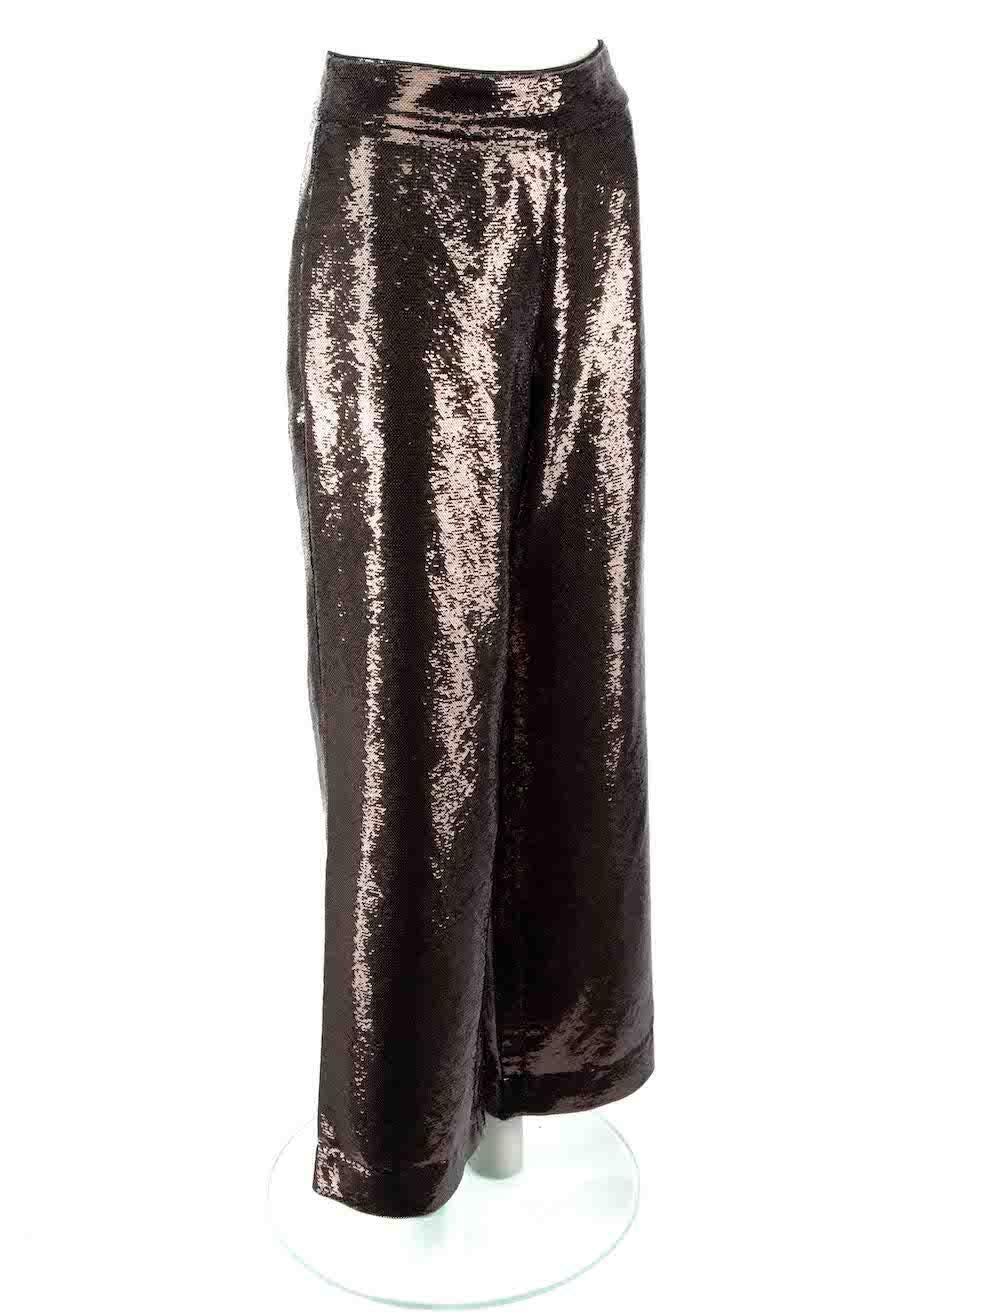 CONDITION is Very good. Hardly any visible wear to trousers is evident on this used Golden Goose designer resale item.
 
Details
Brown
Polyester
Wide leg trousers
Sequinned
High rise
Side zip closure
 
Made in Italy
 
Composition
100% Polyester
